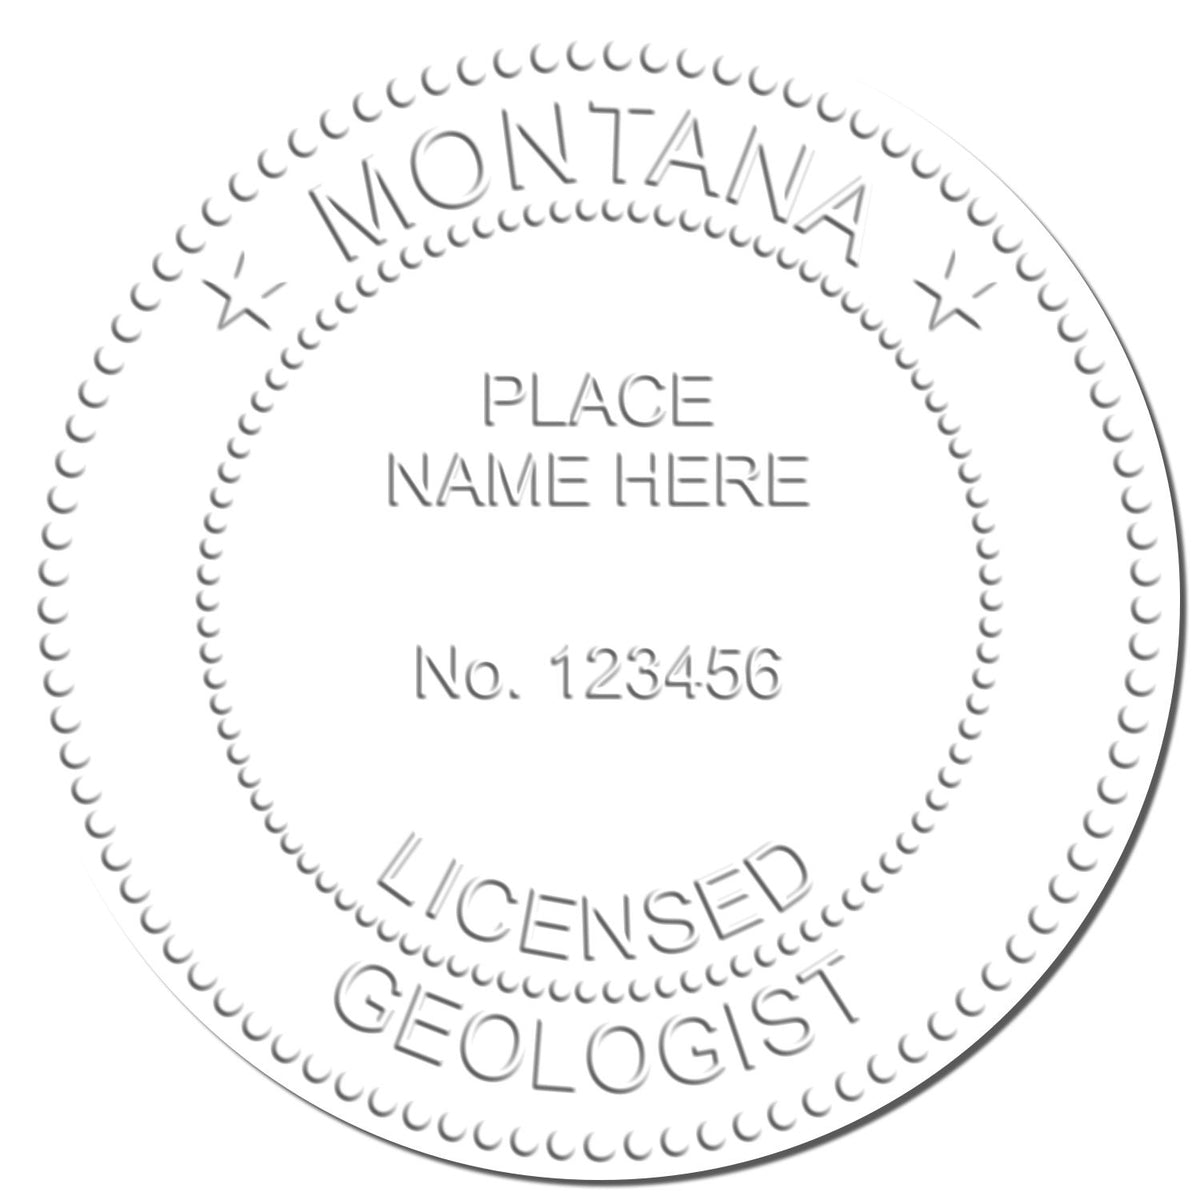 A stamped imprint of the Gift Montana Geologist Seal in this stylish lifestyle photo, setting the tone for a unique and personalized product.